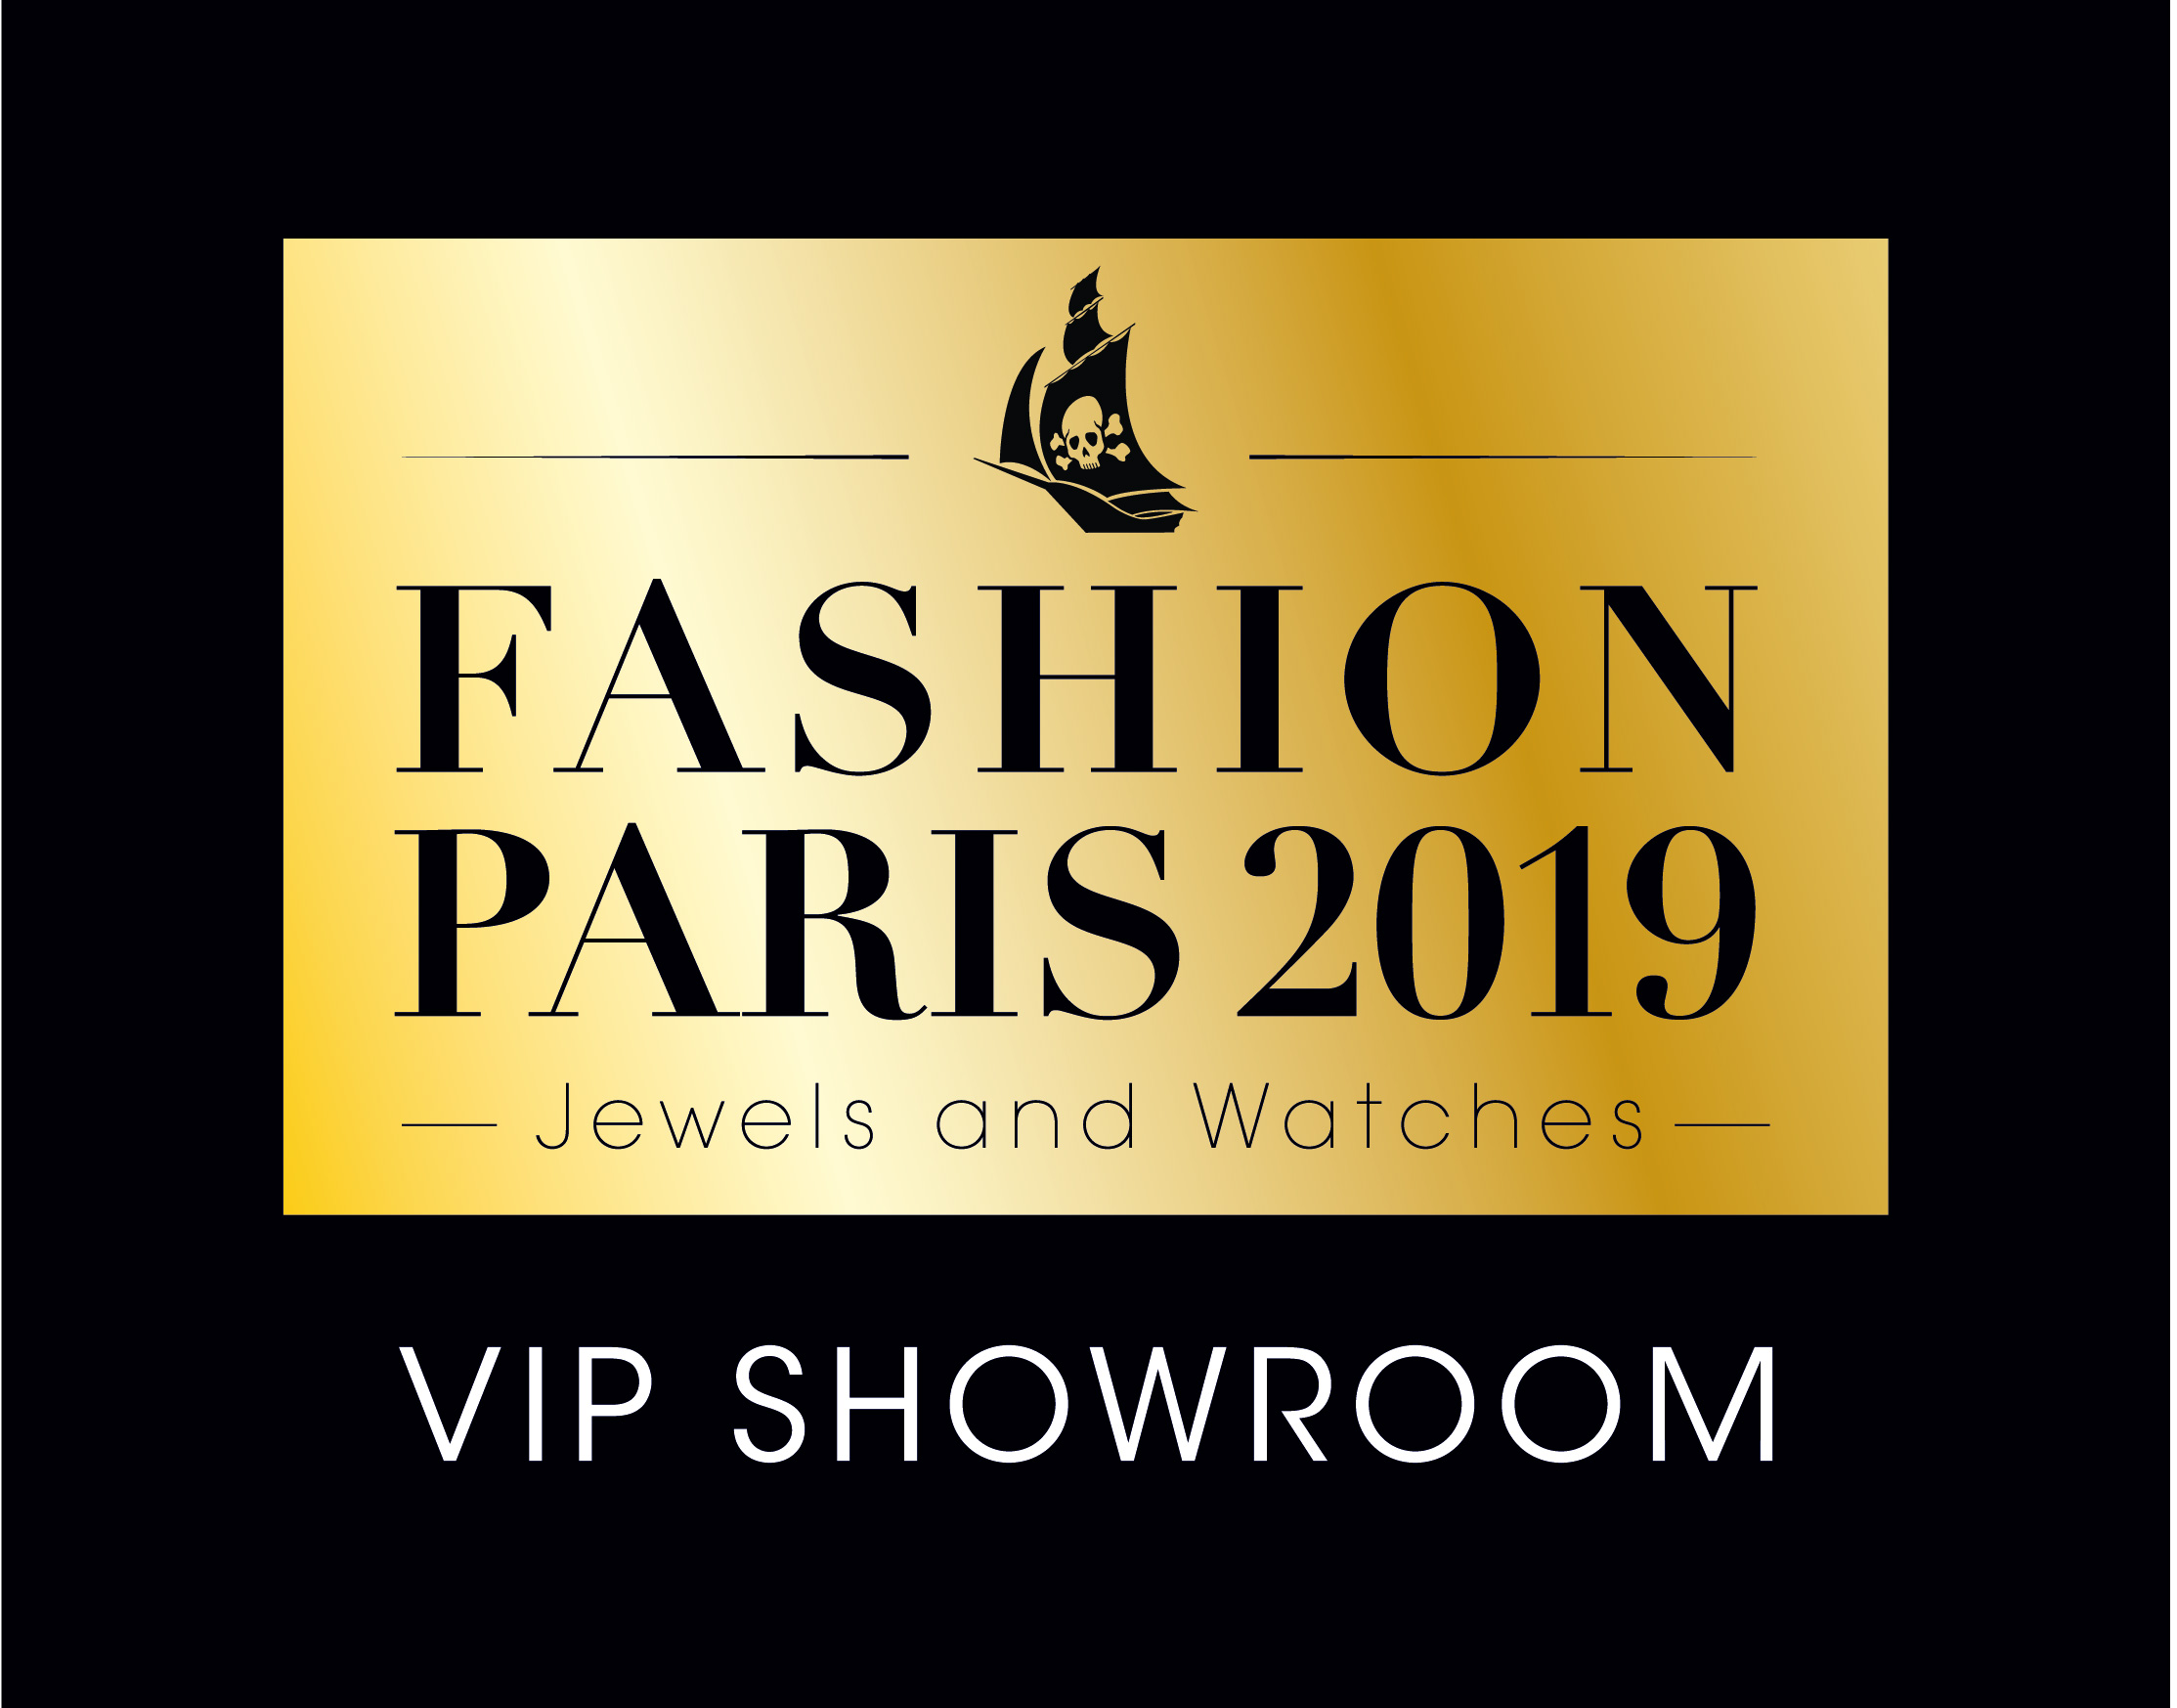 FASHION PARIS 2019 – JEWELS AND WATCHES 2019